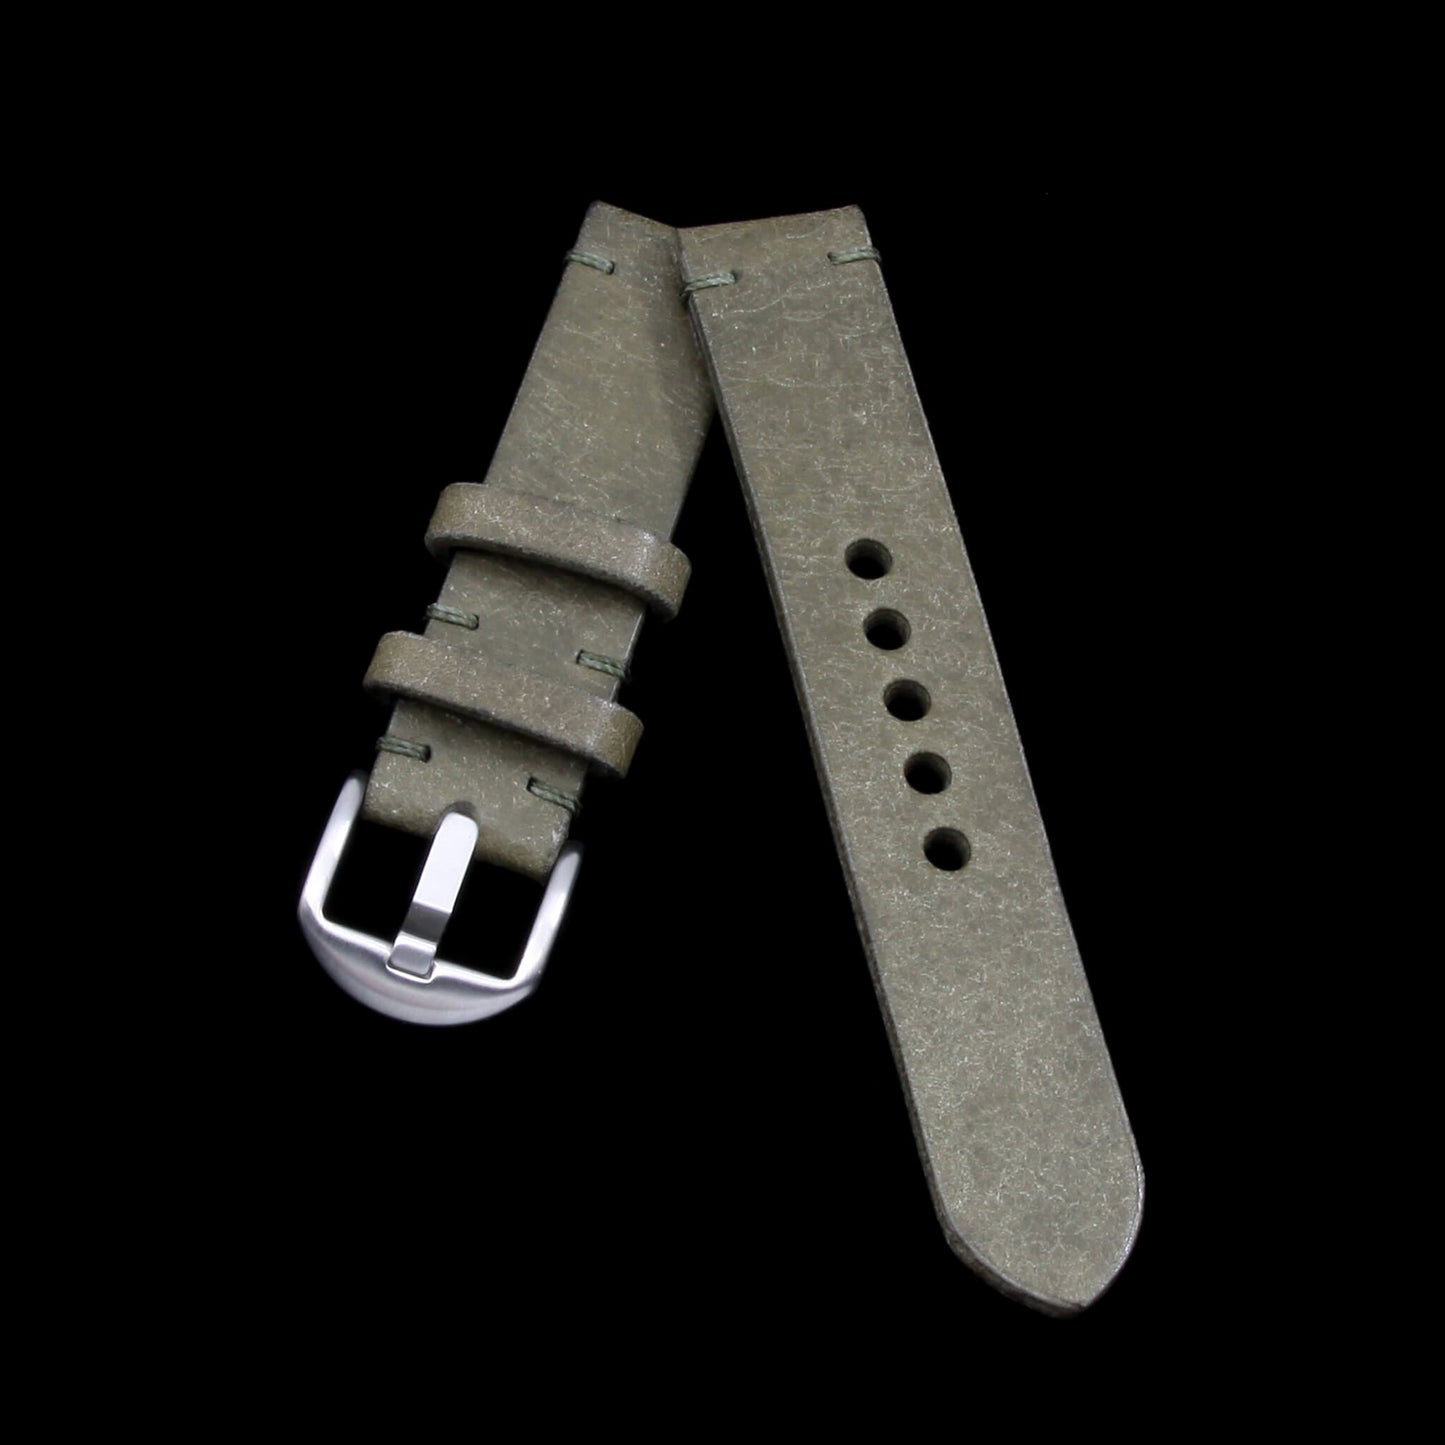 Rustic Olive Leather Apple Watch Strap crafted from Full Grain Italian Veg Tanned Leather